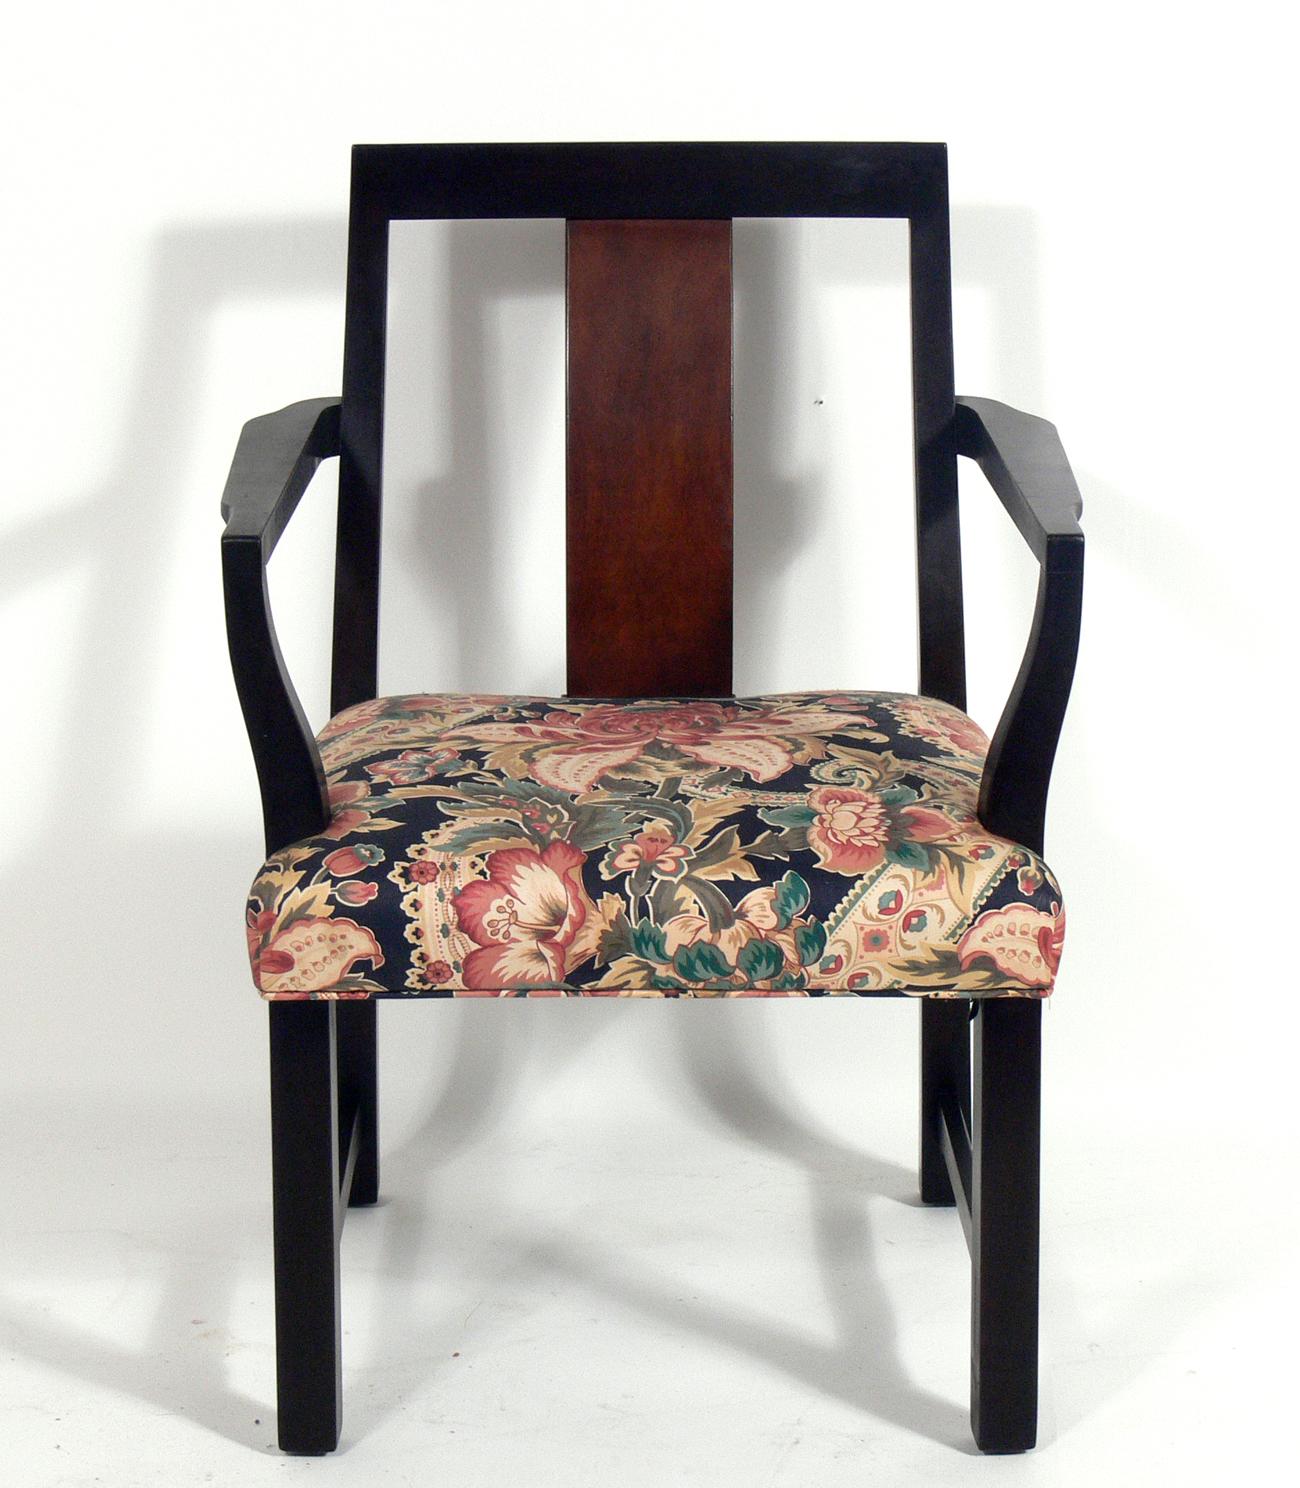 Set of six dining chairs, designed by Edward Wormley for Dunbar, American, circa 1950s. Elegant modern form with a subtle Asian influence to the design. The set consists of two armchairs and four side chairs. They are being reupholstered and can be